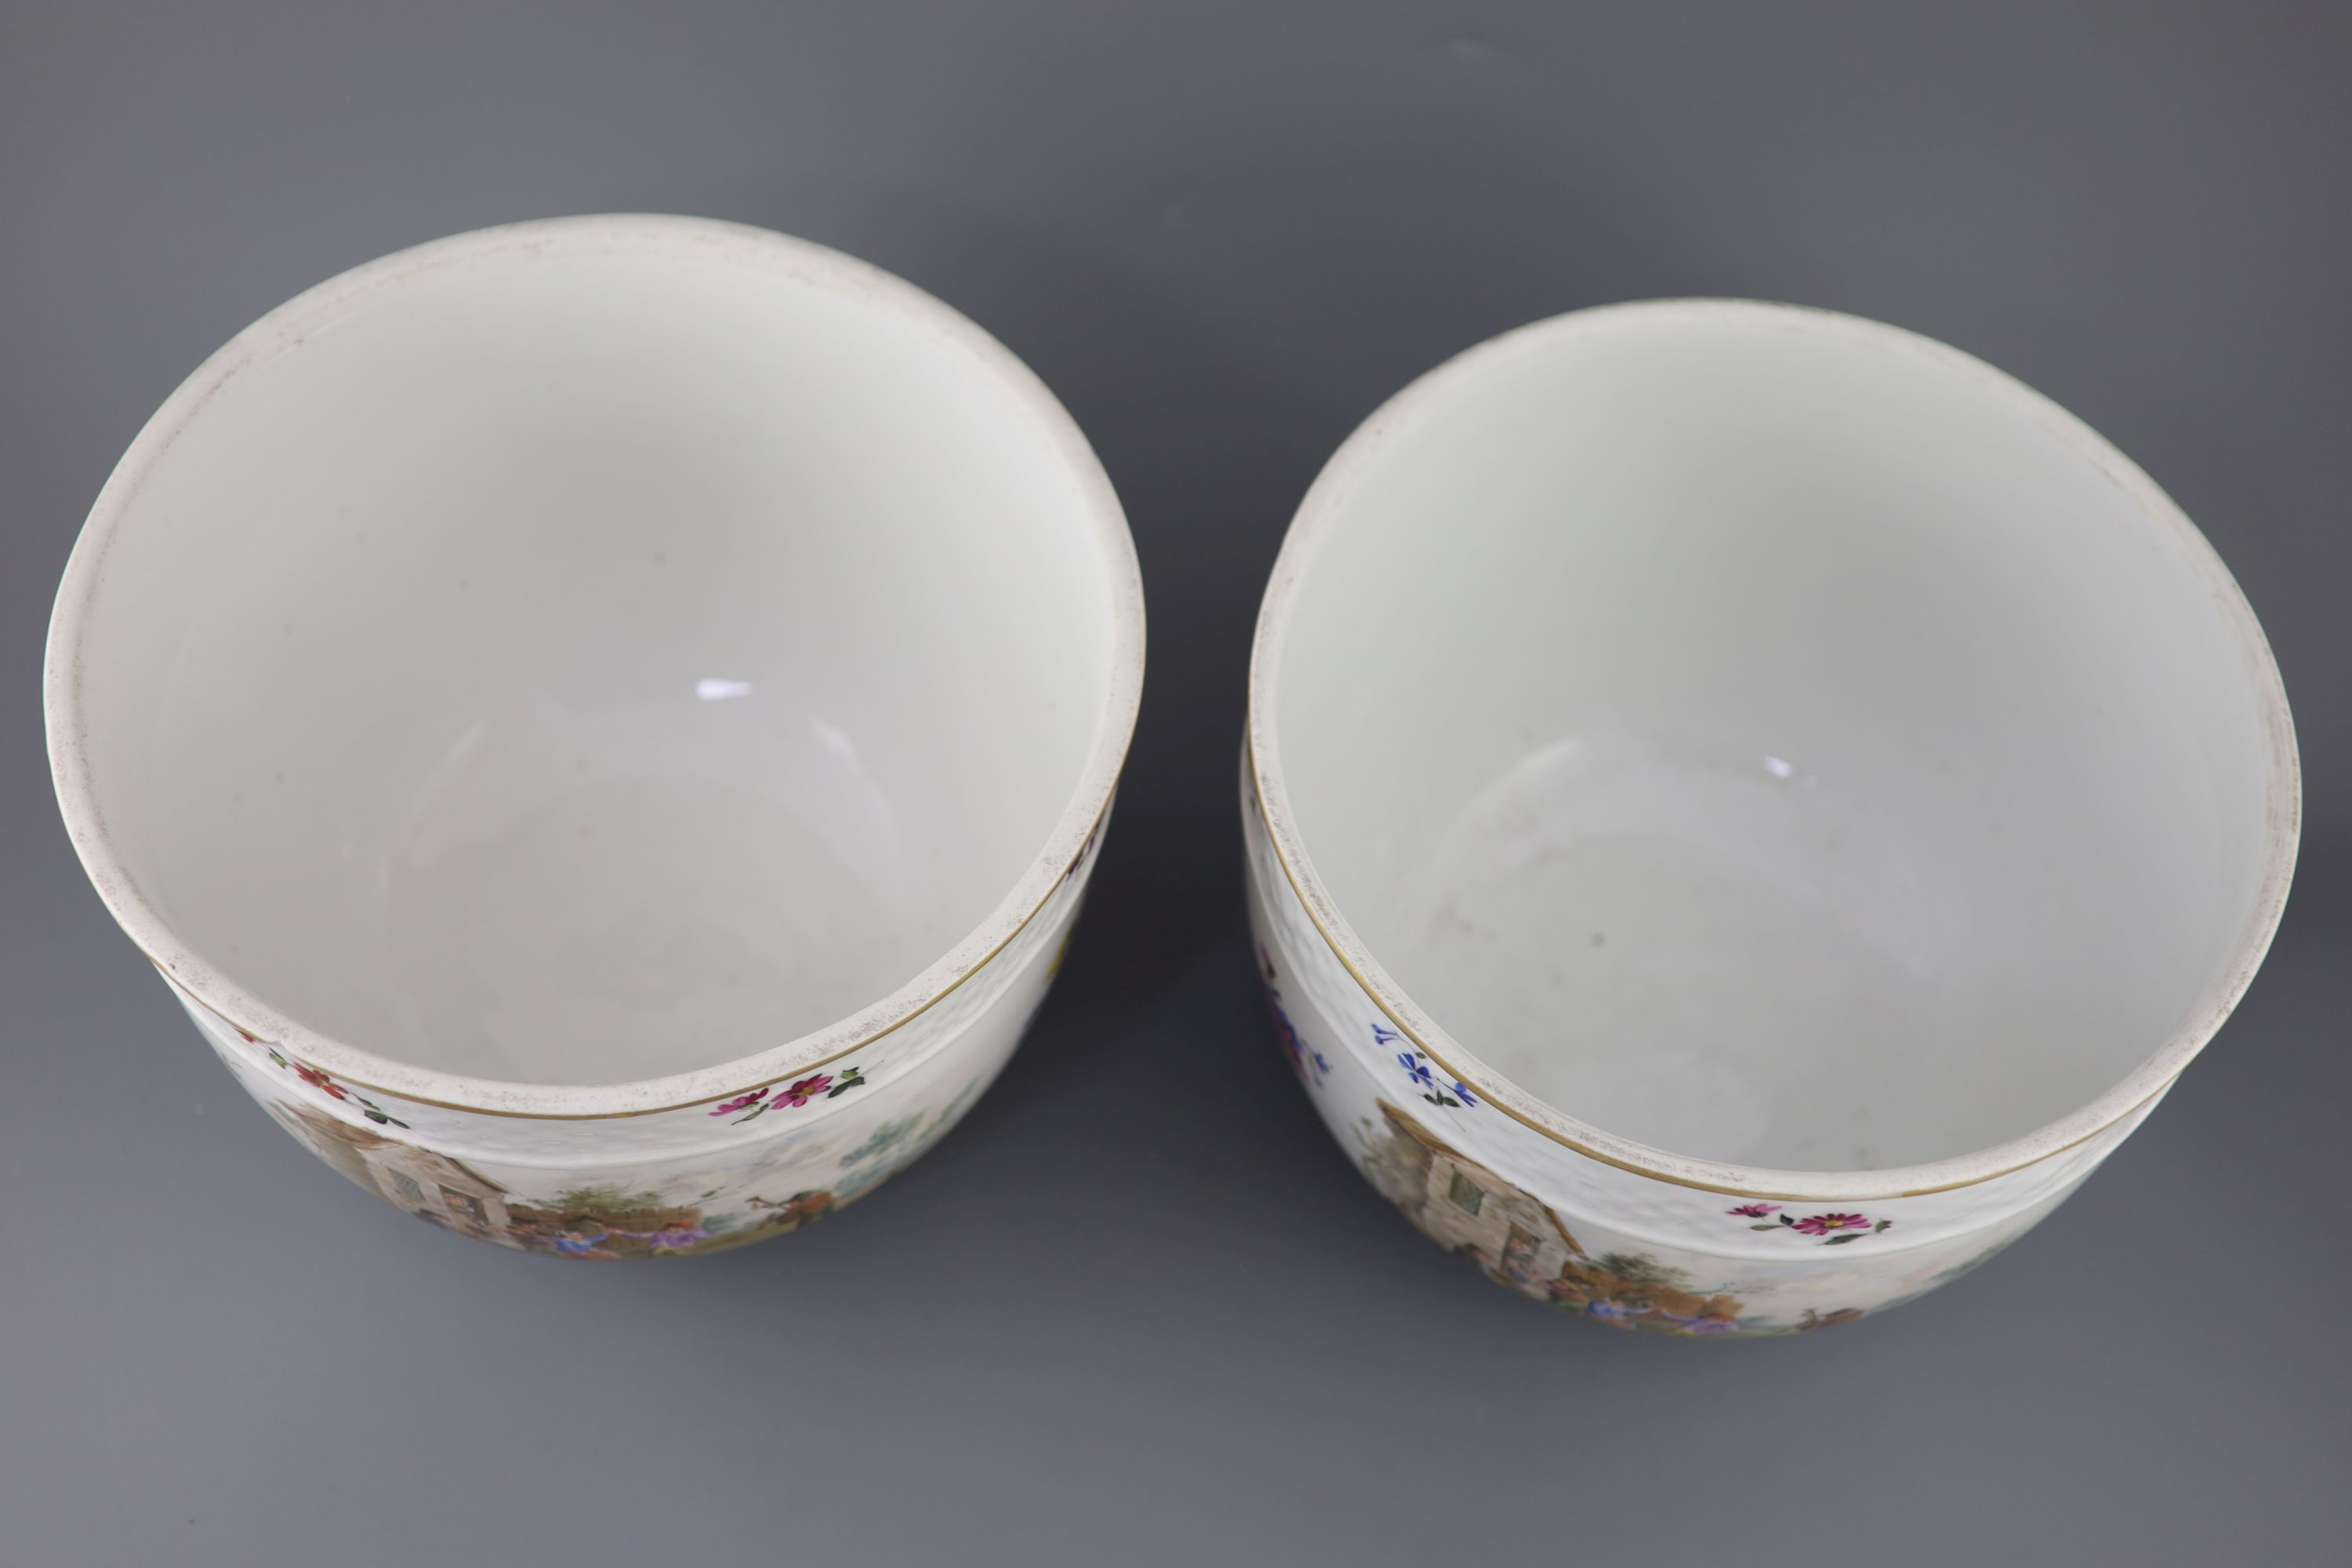 A pair of large Meissen style porcelain bowls and covers, late 19th century, possibly Potschappel, 34cm high 29cm diameter